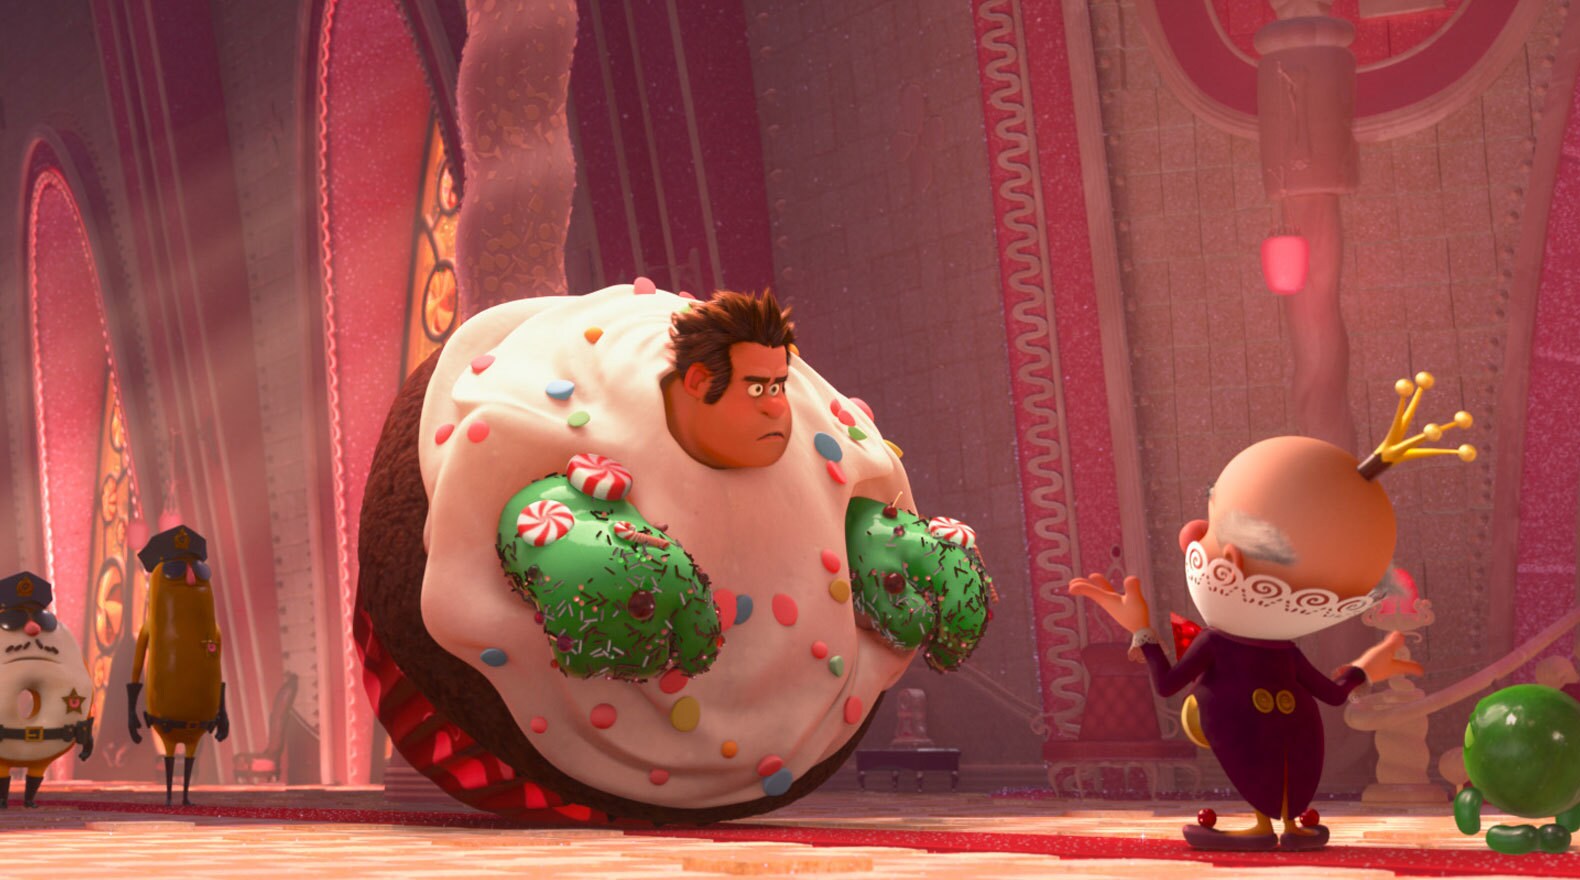 King Candy talking to Ralph, played by John C. Riley, who is stuck in a giant cupcake with green hands in "Wreck-It Ralph"